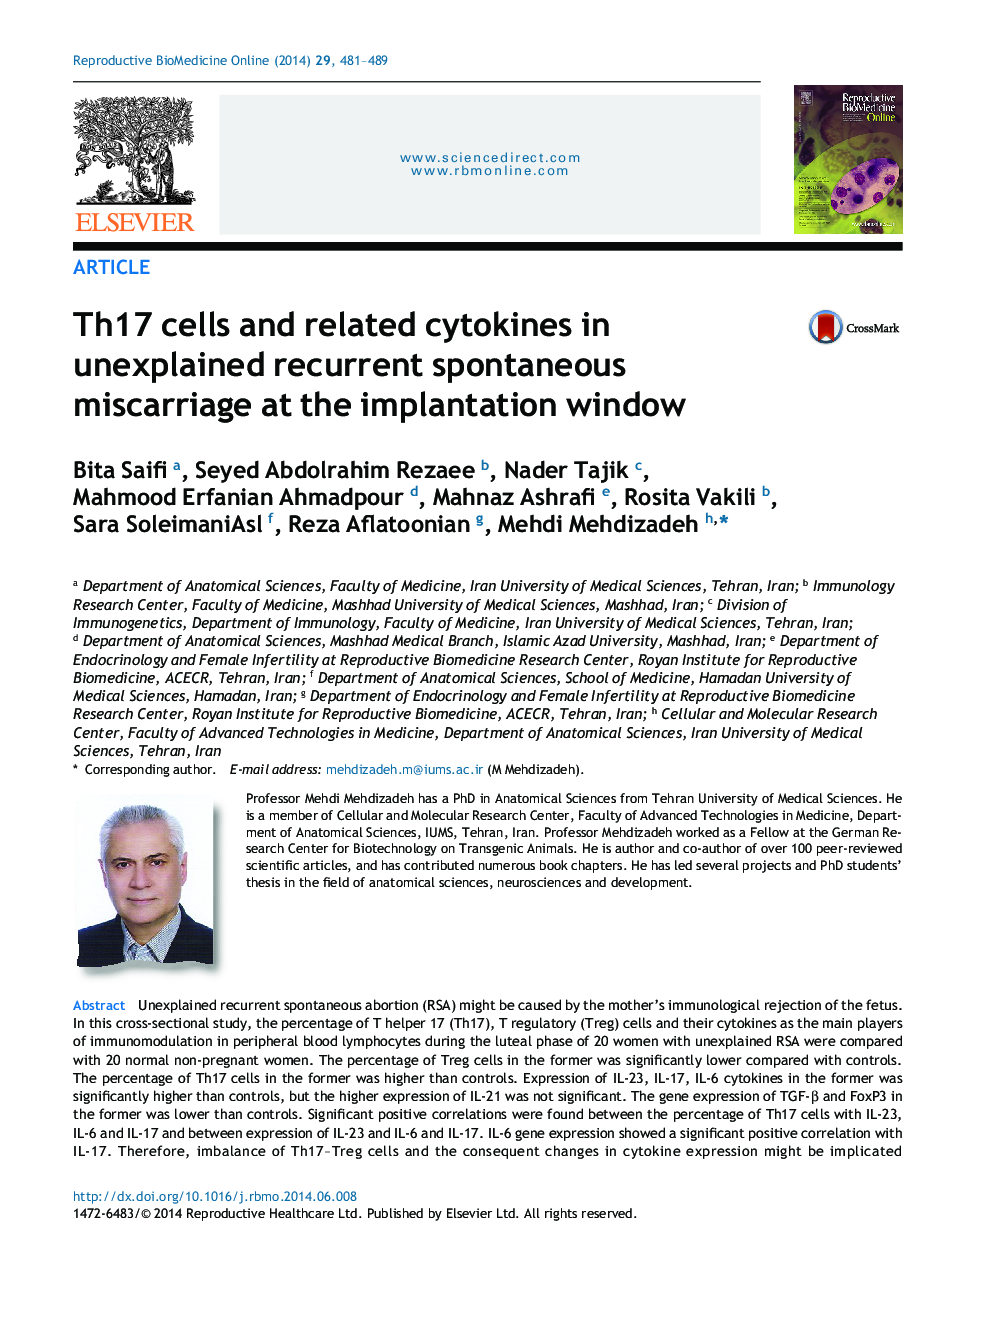 Th17 cells and related cytokines in unexplained recurrent spontaneous miscarriage at the implantation window